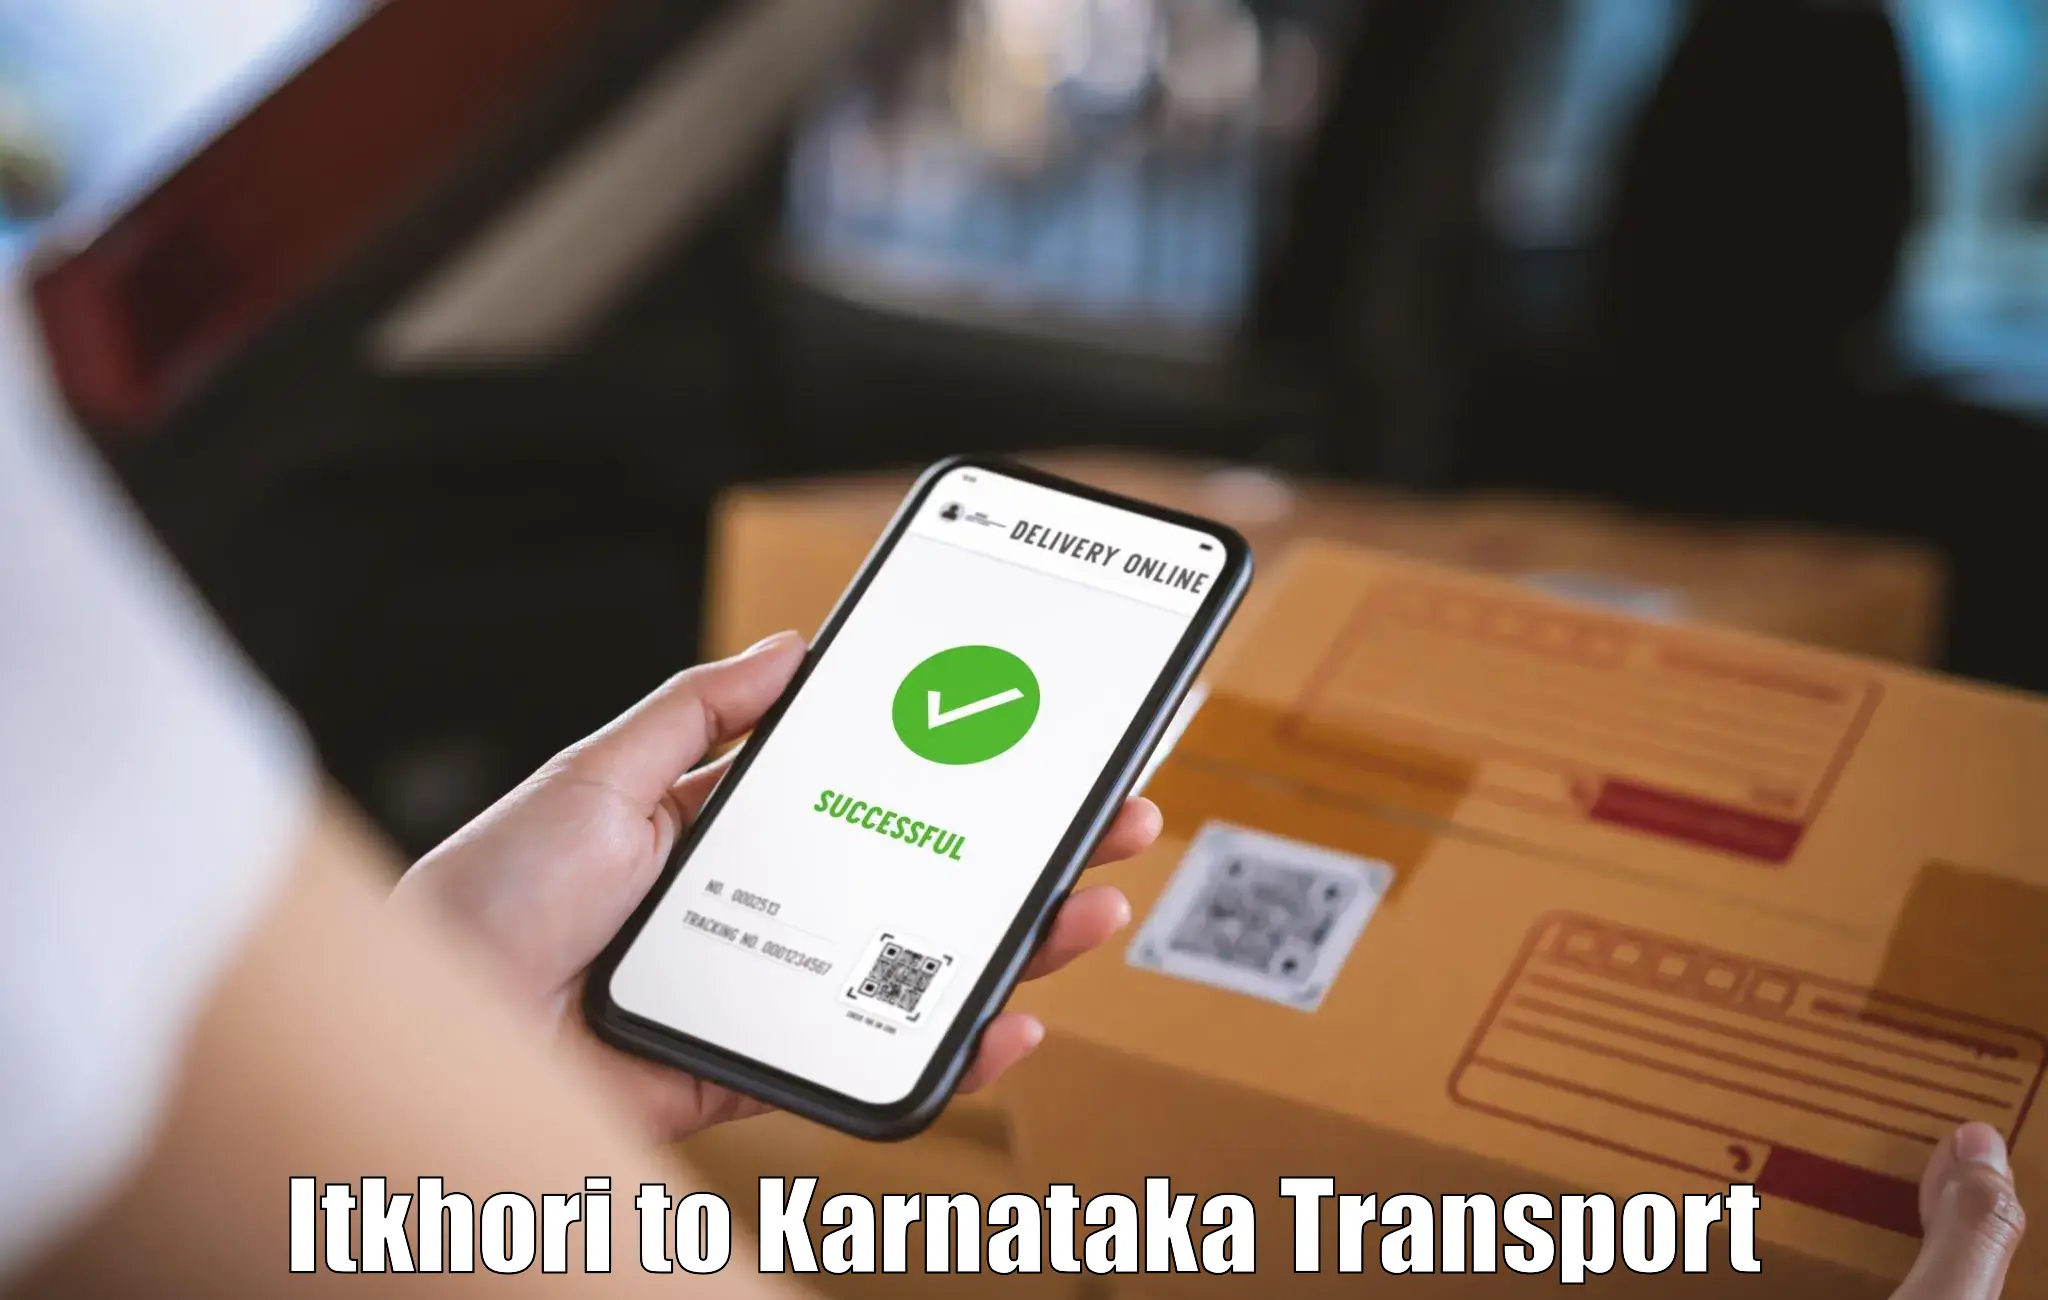 Best transport services in India Itkhori to Kalaghatgi